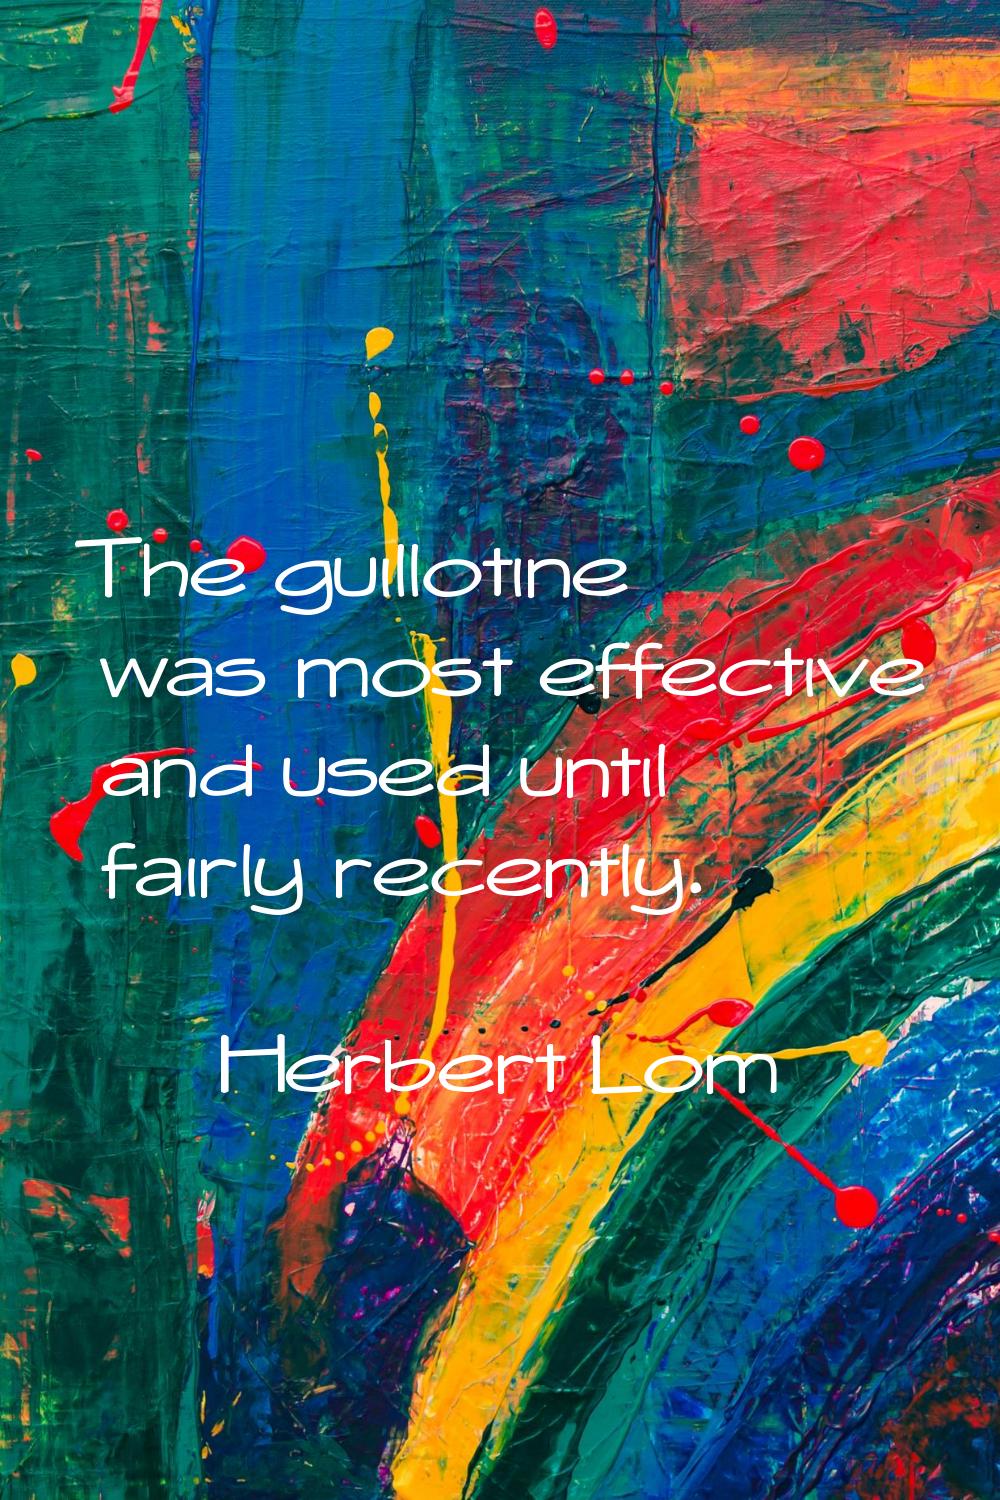 The guillotine was most effective and used until fairly recently.